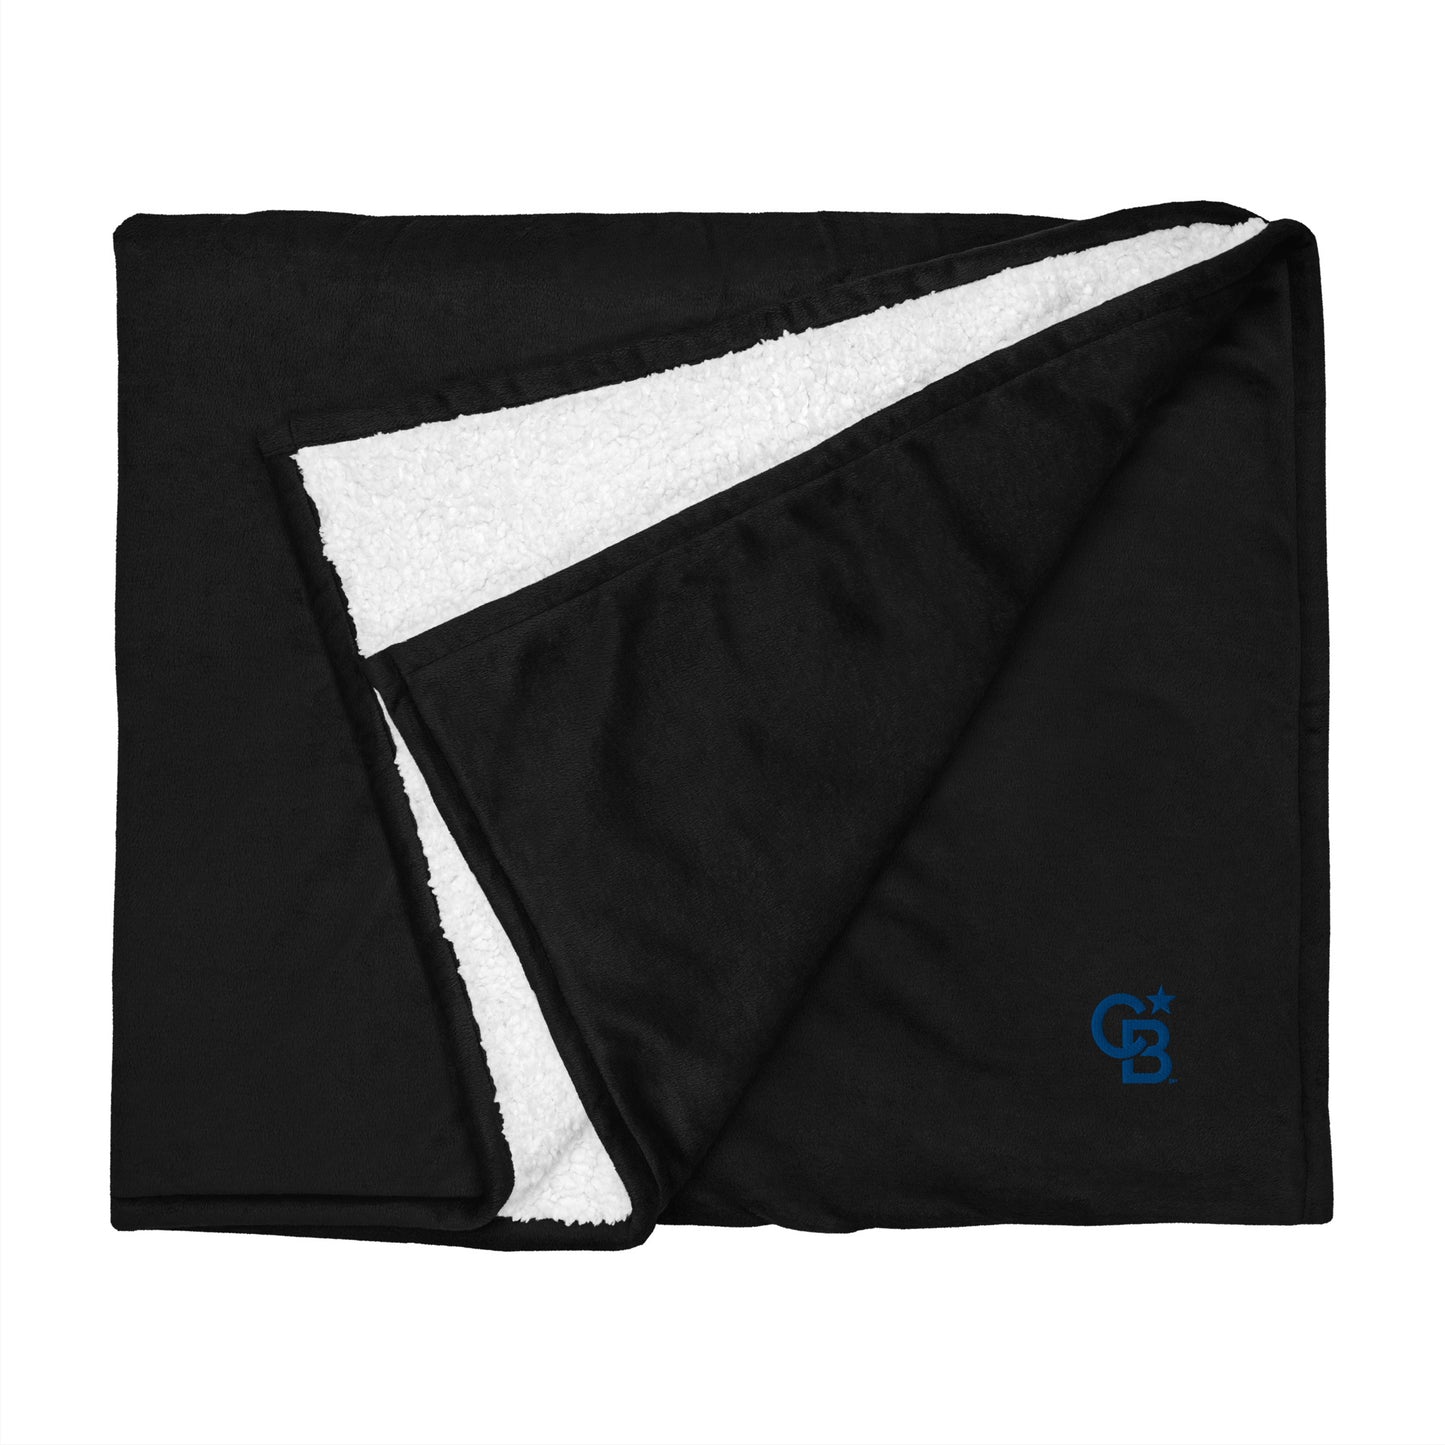 Coldwell Banker Premium sherpa blanket (from $$91 per complete box)